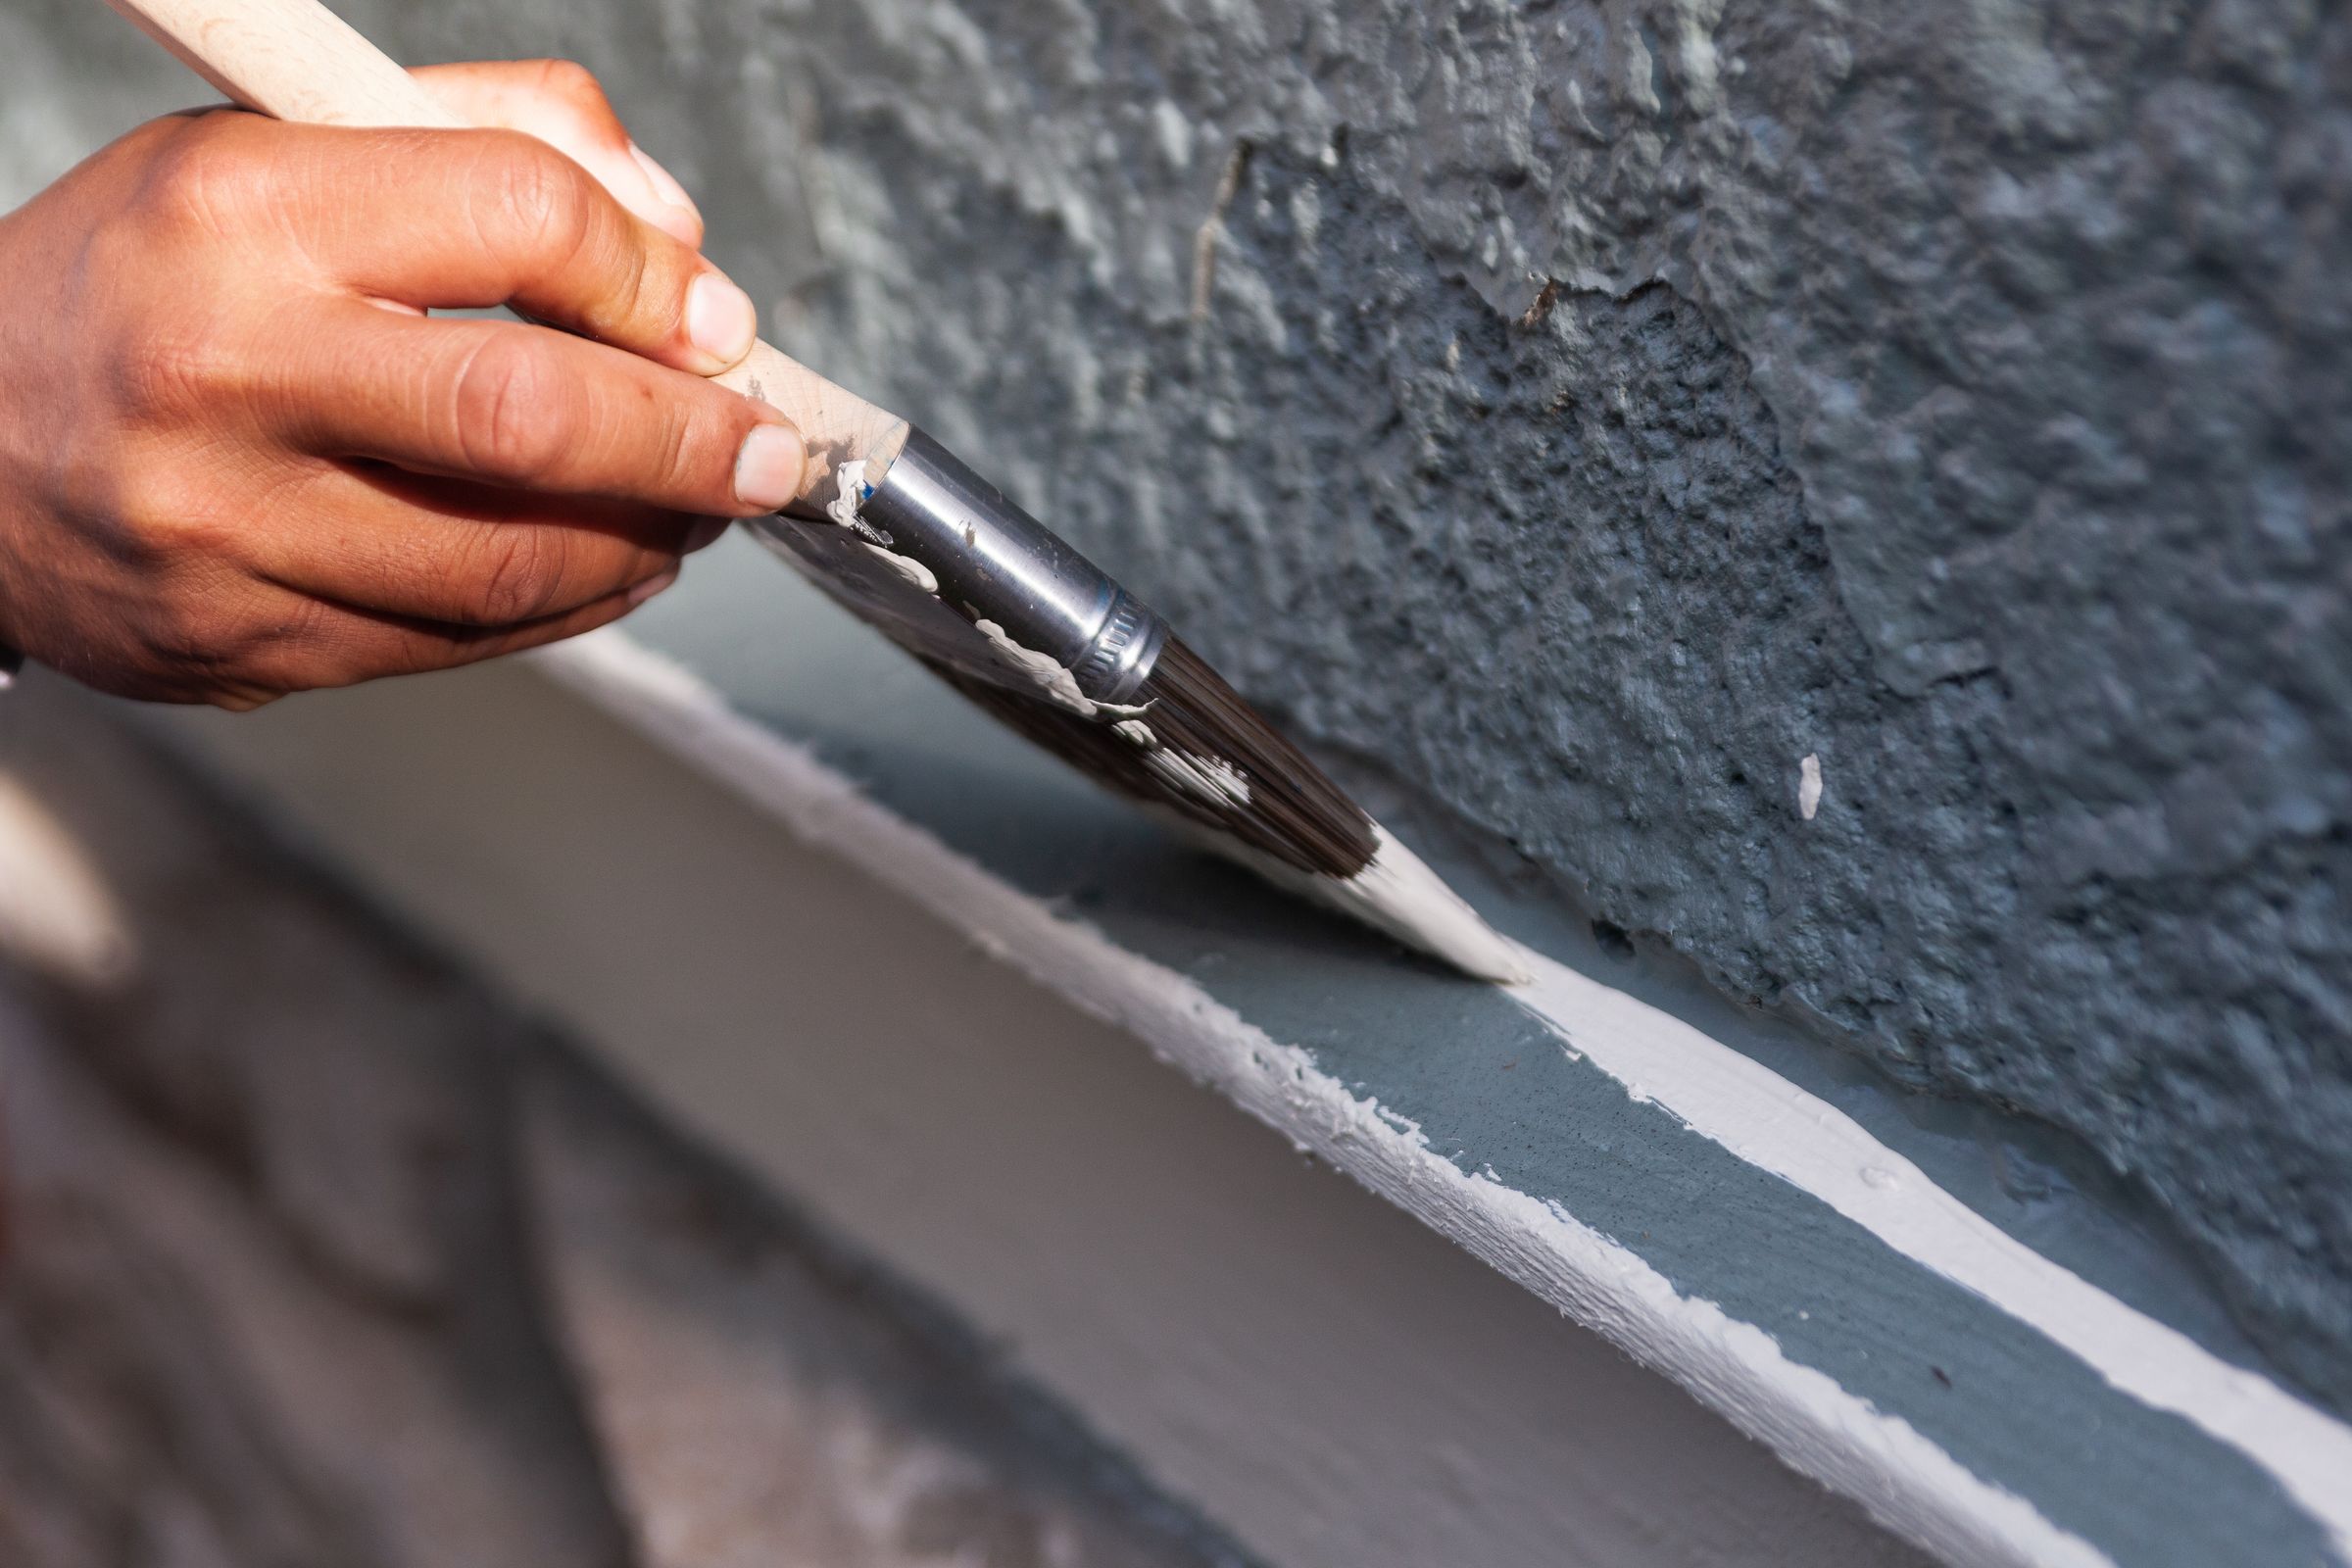 Painting exterior trim with a brush